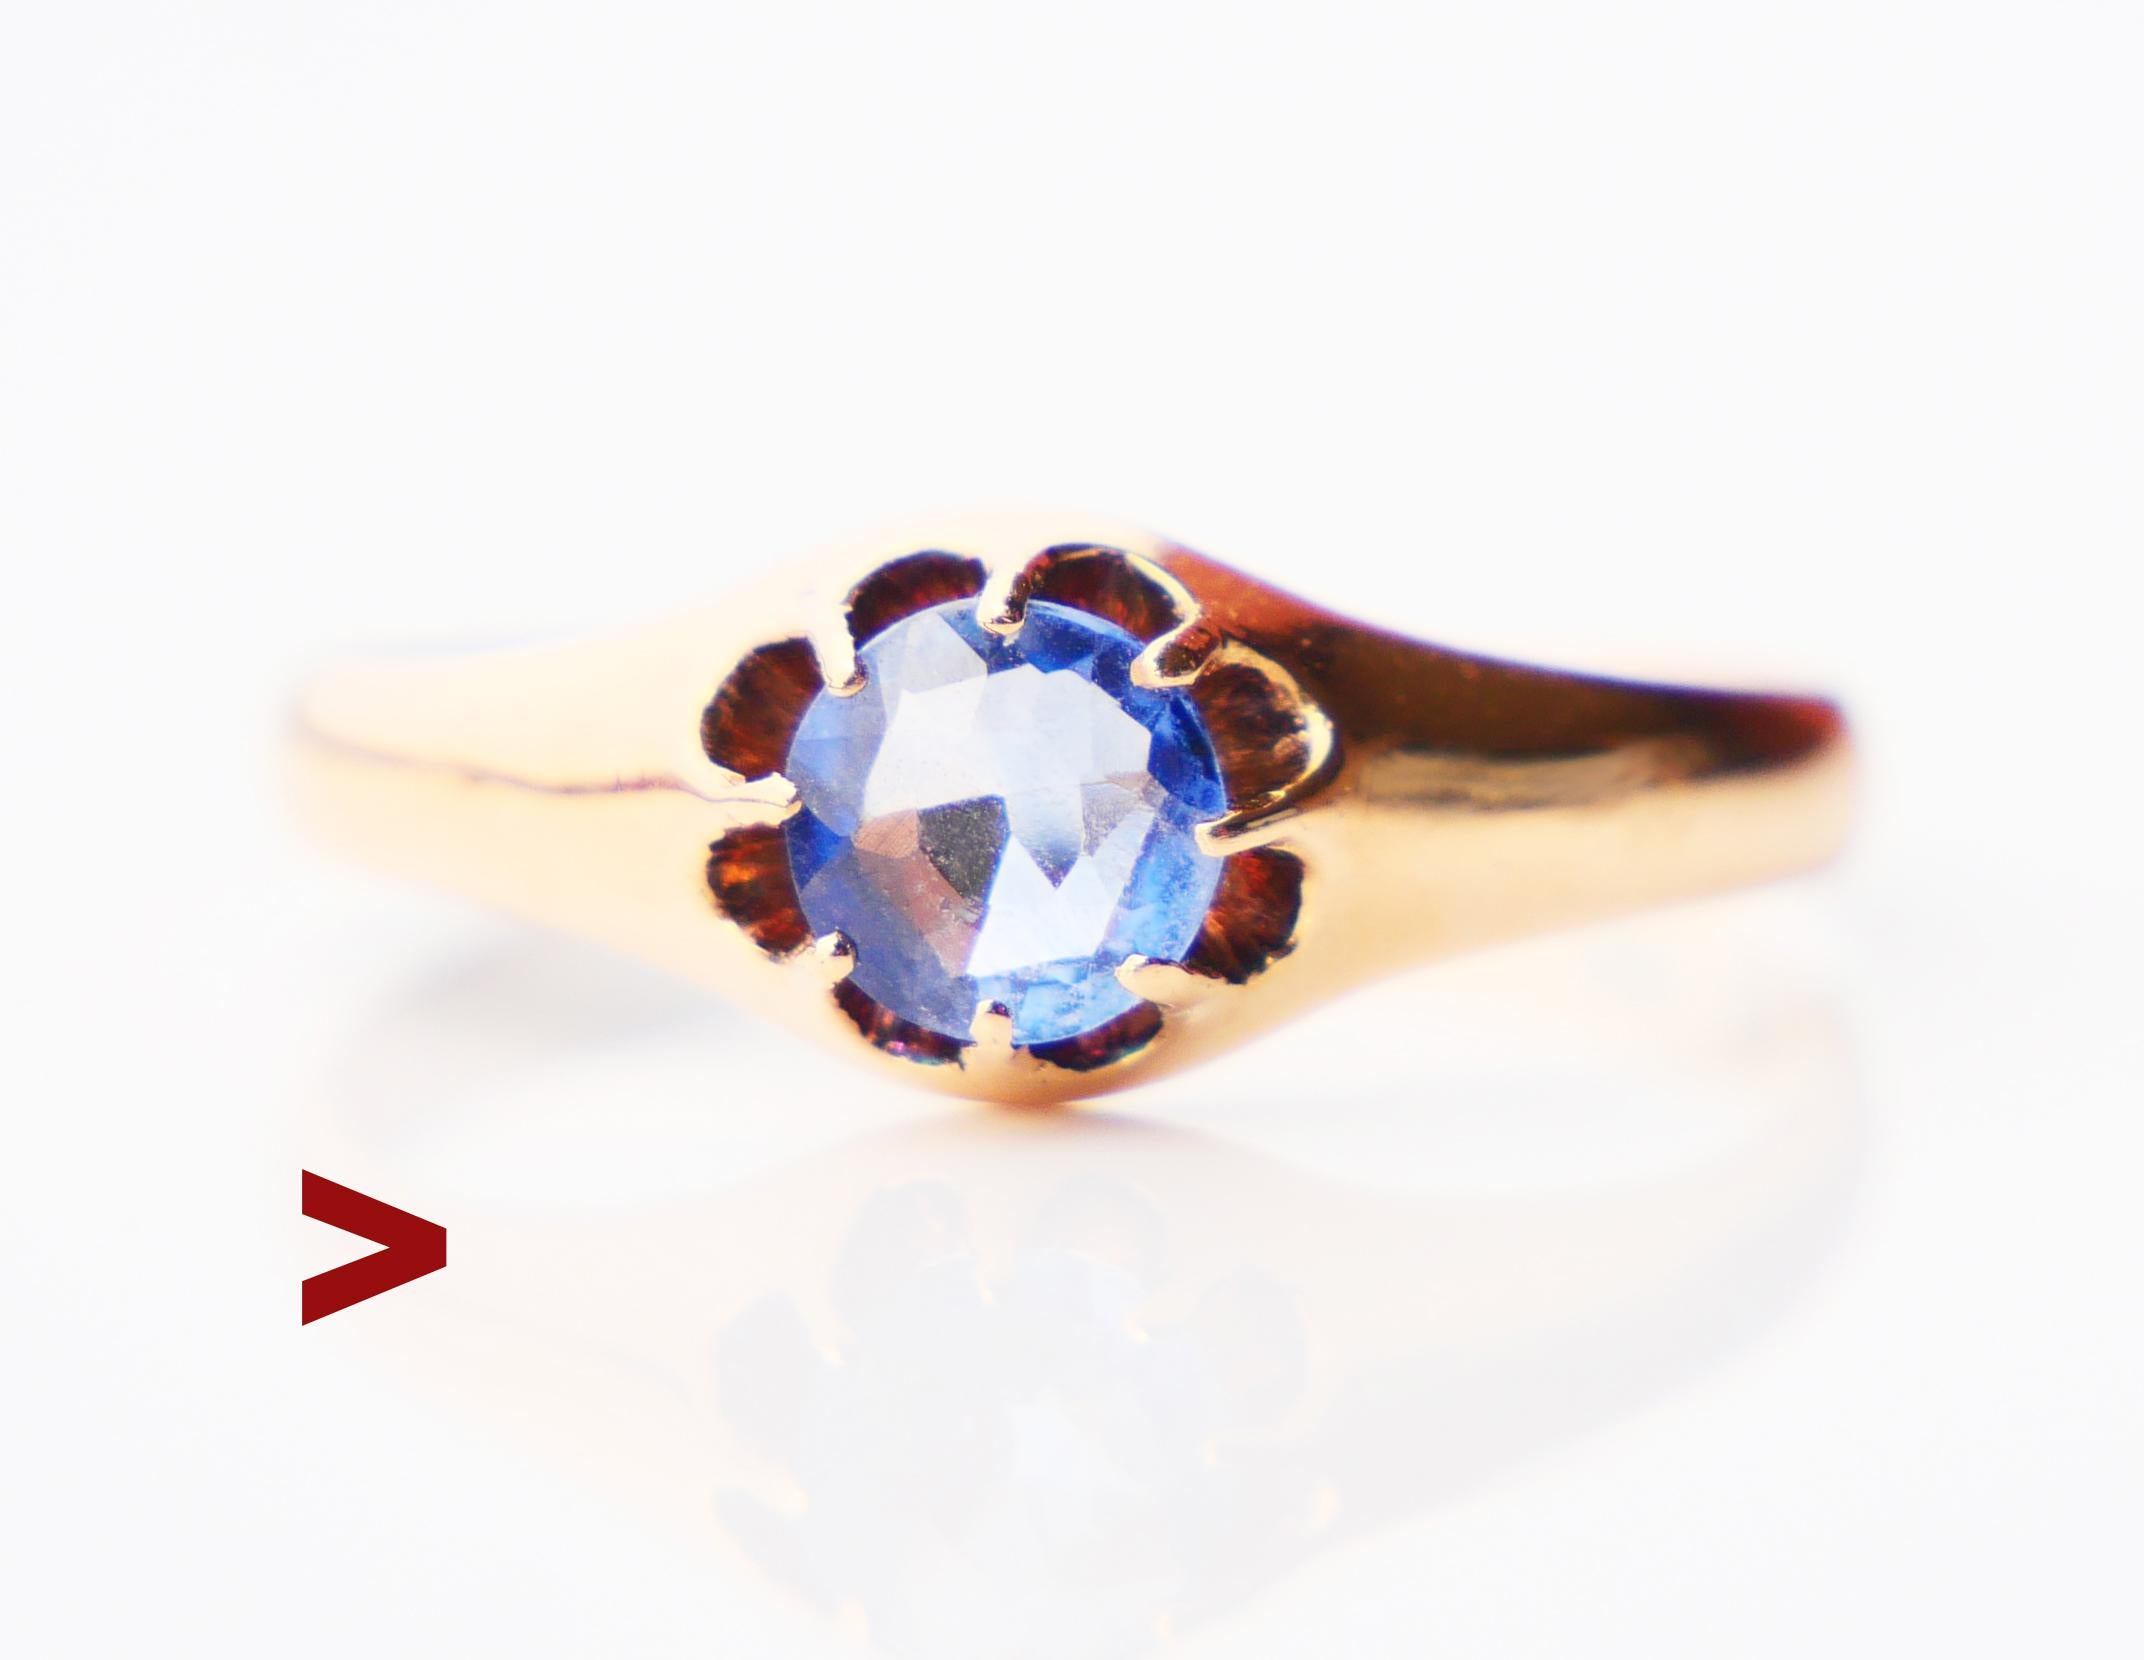 A ring from the distant Art Deco period featuring an 18K Rose Gold sleekly band + old European diamond cut natural Sapphire Ø 5 mm x 2 mm deep / ca. 0.7 ct. Stone is of light Blue / likely Ceylon Cornflower variety with very minor inclusions and